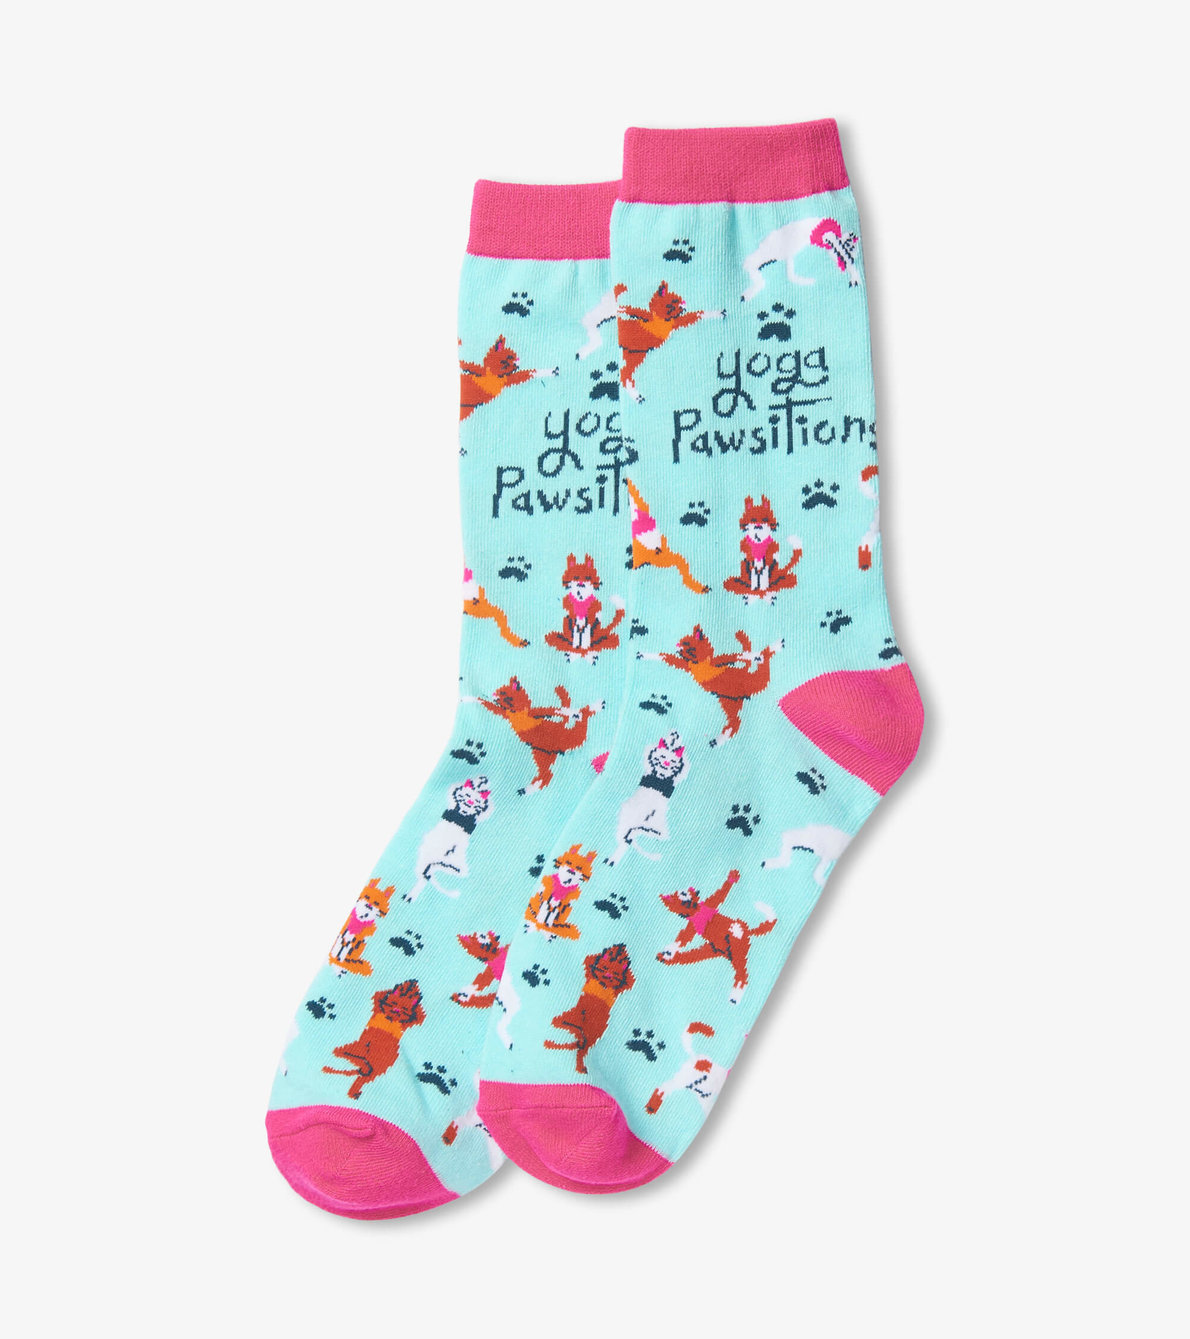 View larger image of Yoga Pawsitions Women's Crew Socks